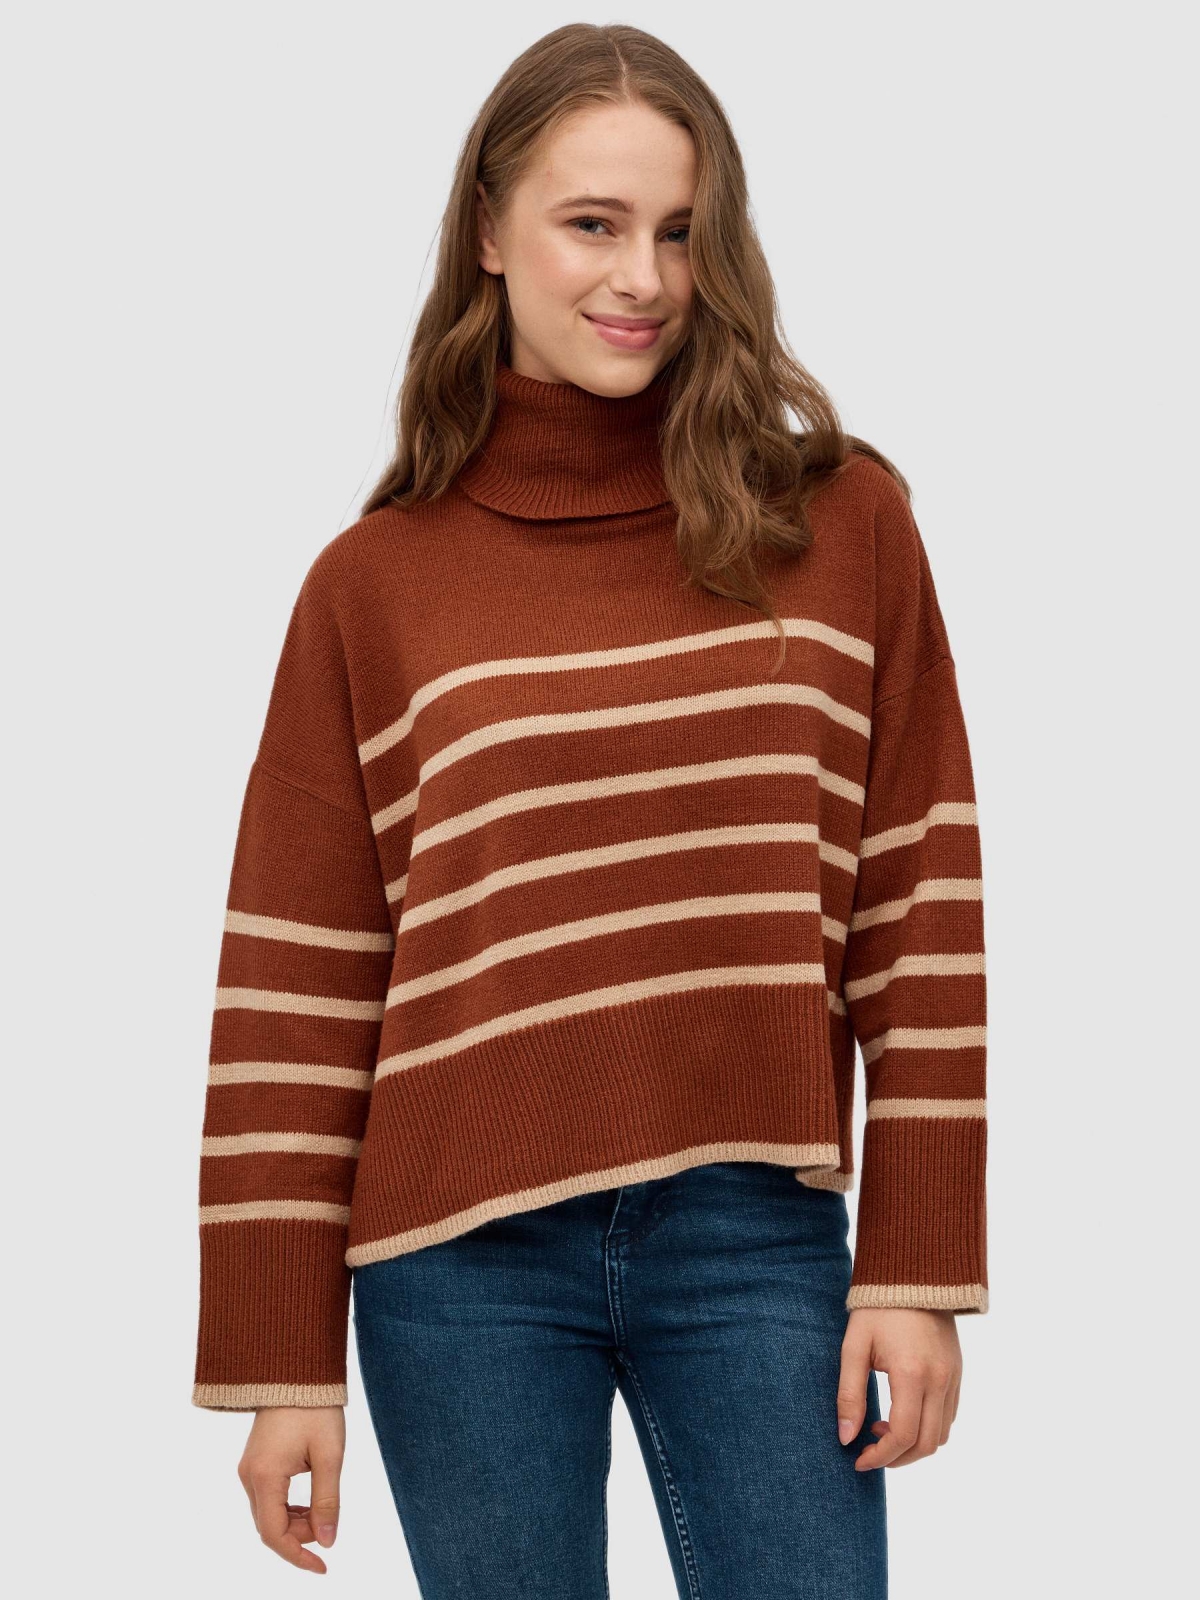 Turtleneck crop sweater brown middle front view